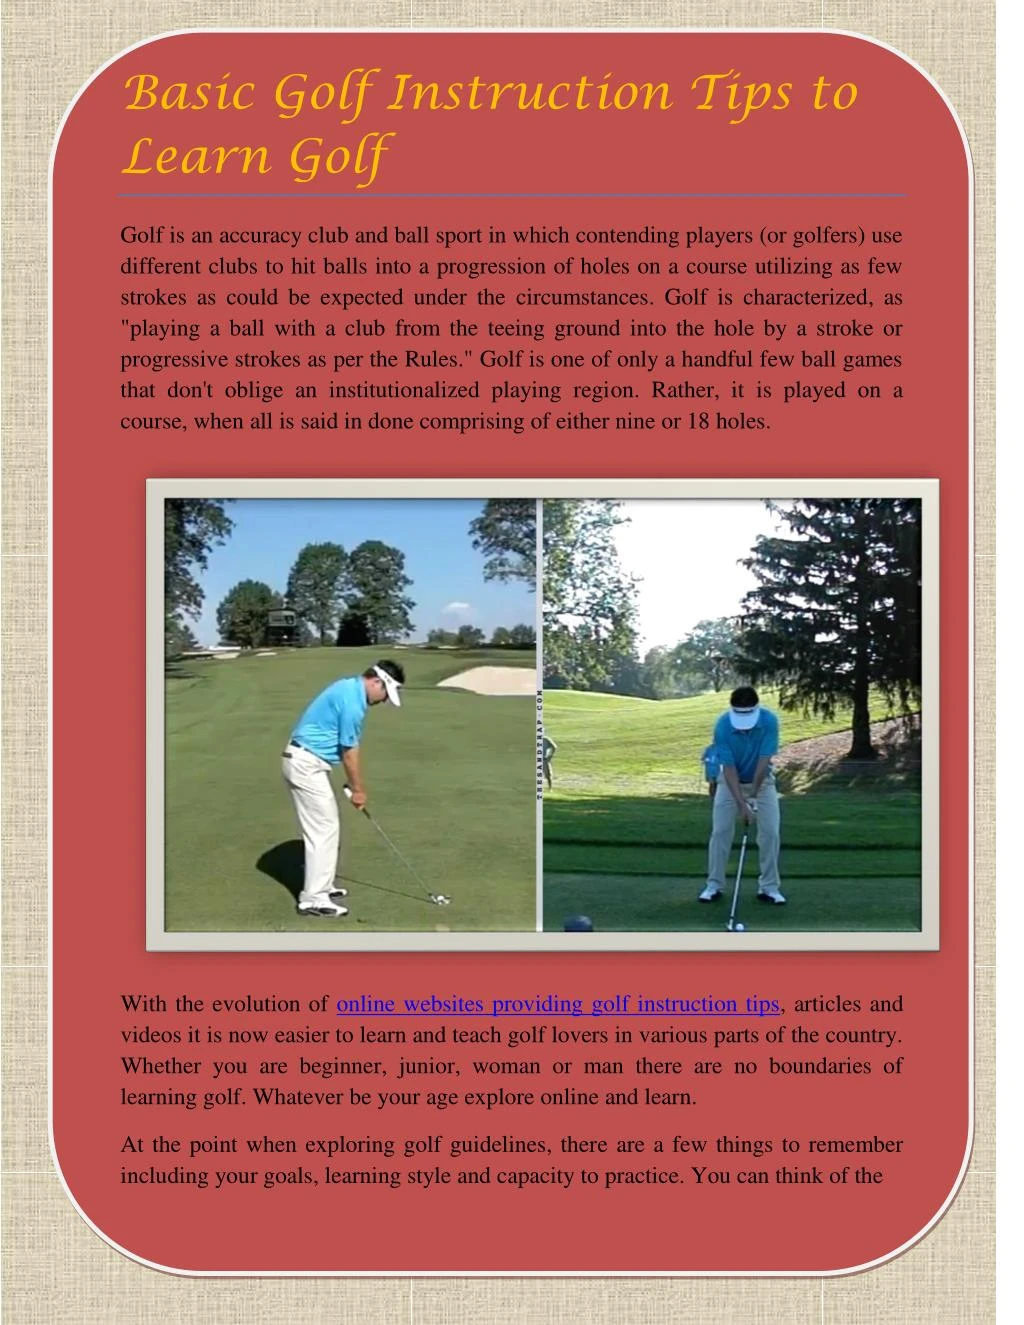 PPT - Basic Golf Instruction Tips to Learn Golf PowerPoint Presentation ...